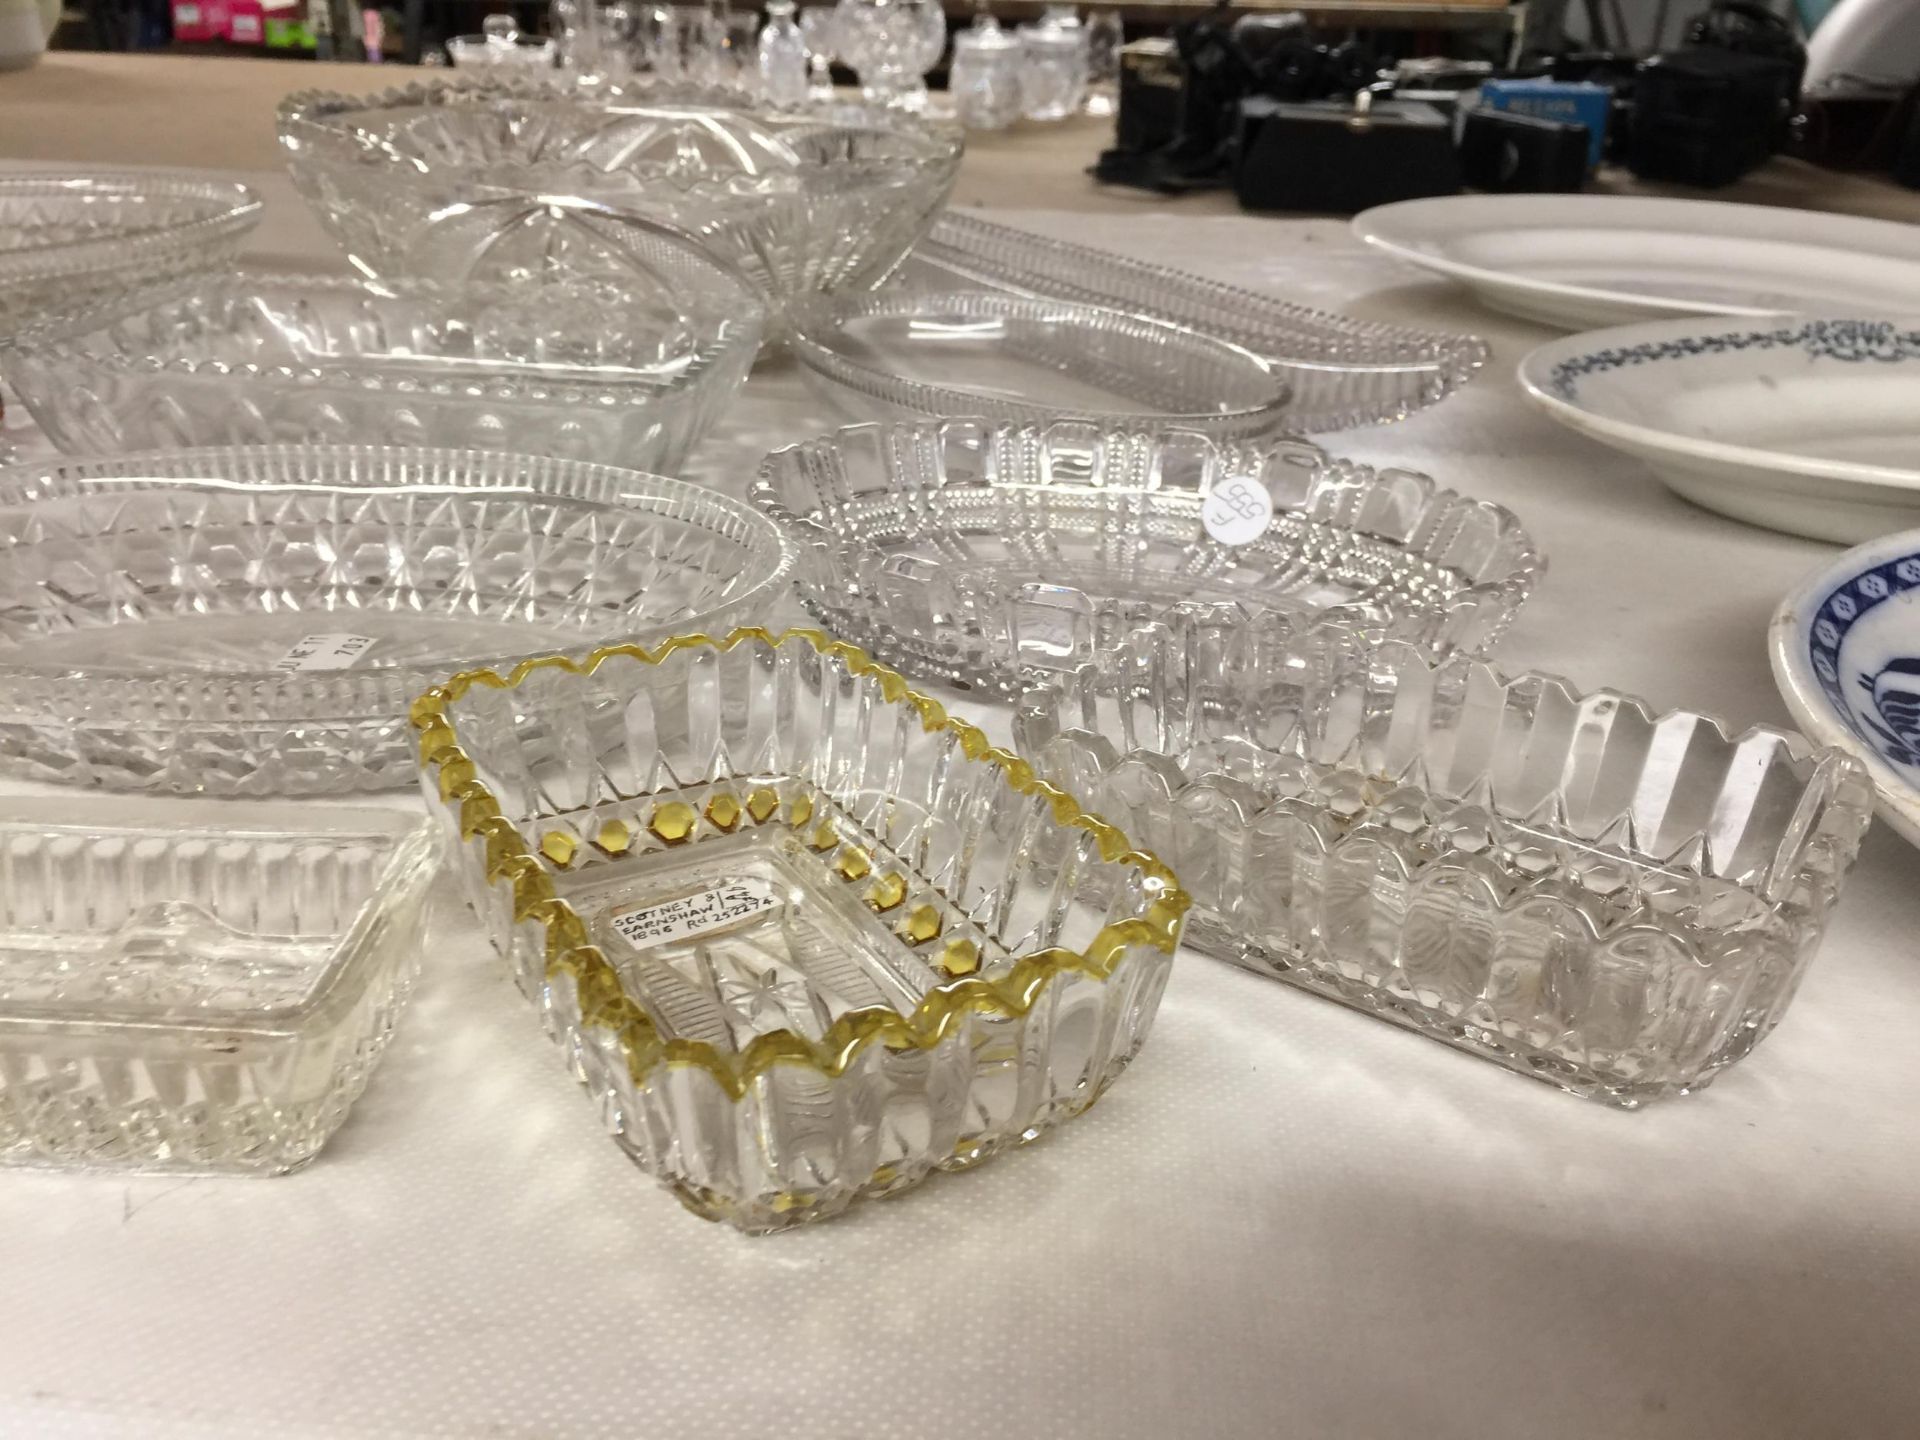 A QUANTITY OF GLASSWARE INCLUDING BOWLS, SERVING DISHES, ETC - Image 4 of 4